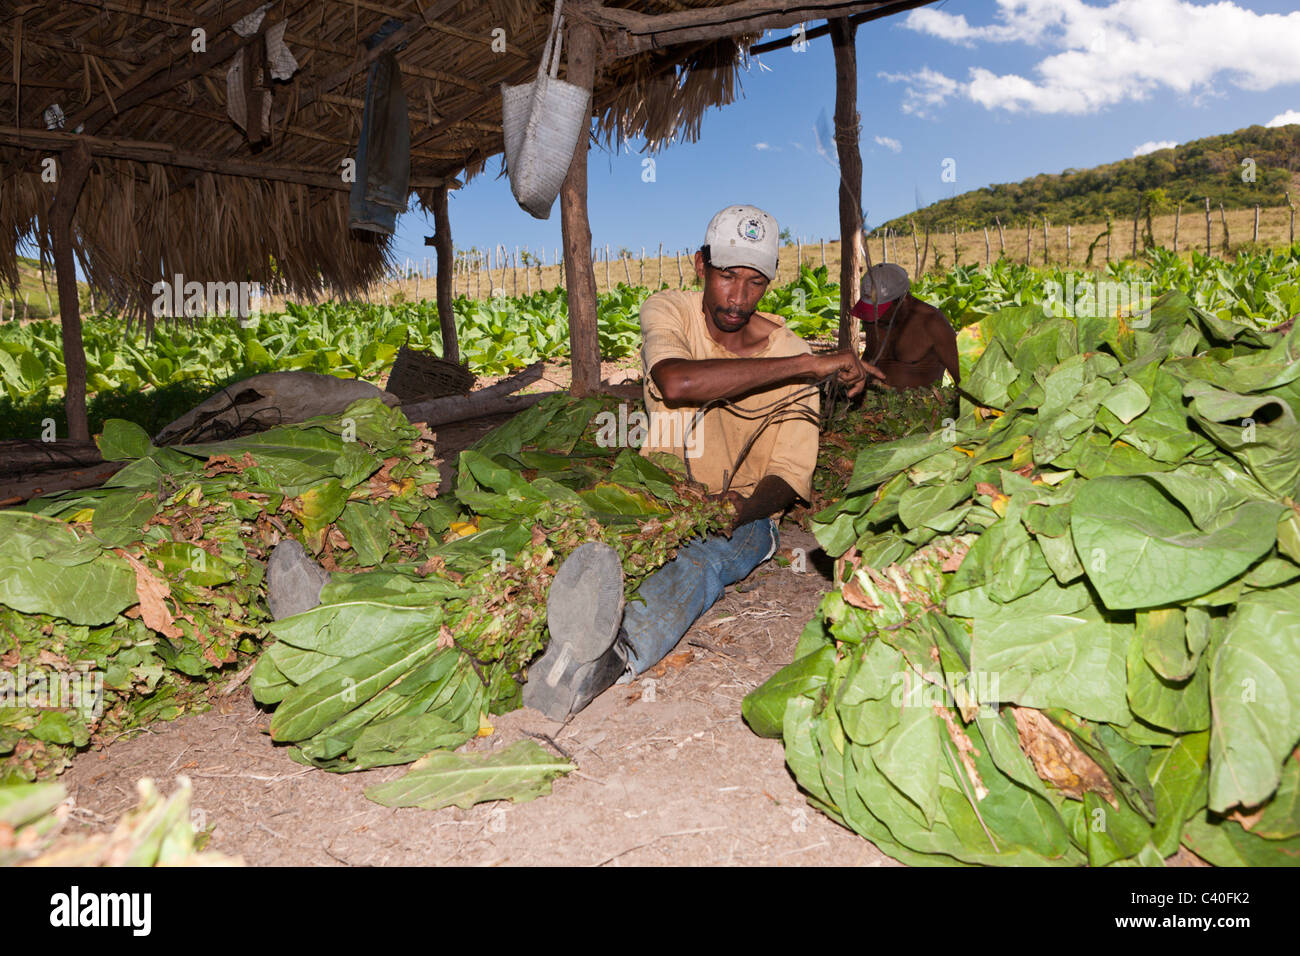 Workers of small Tabacco Plantation, Punta Rucia, Dominican Republic Stock Photo